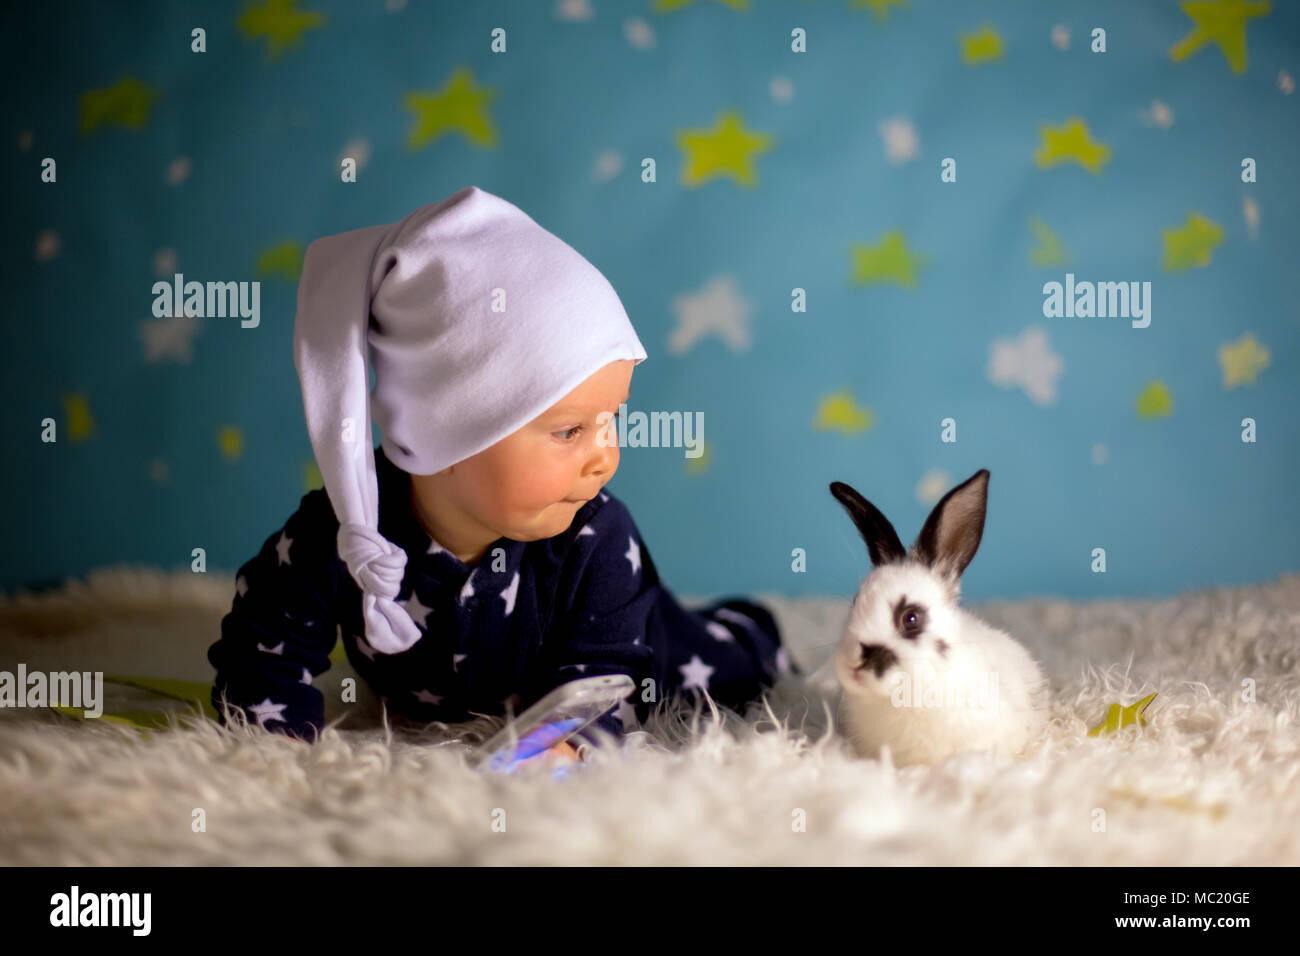 Little Child Baby Boy With Cute White Bunny And Moon On A Blue